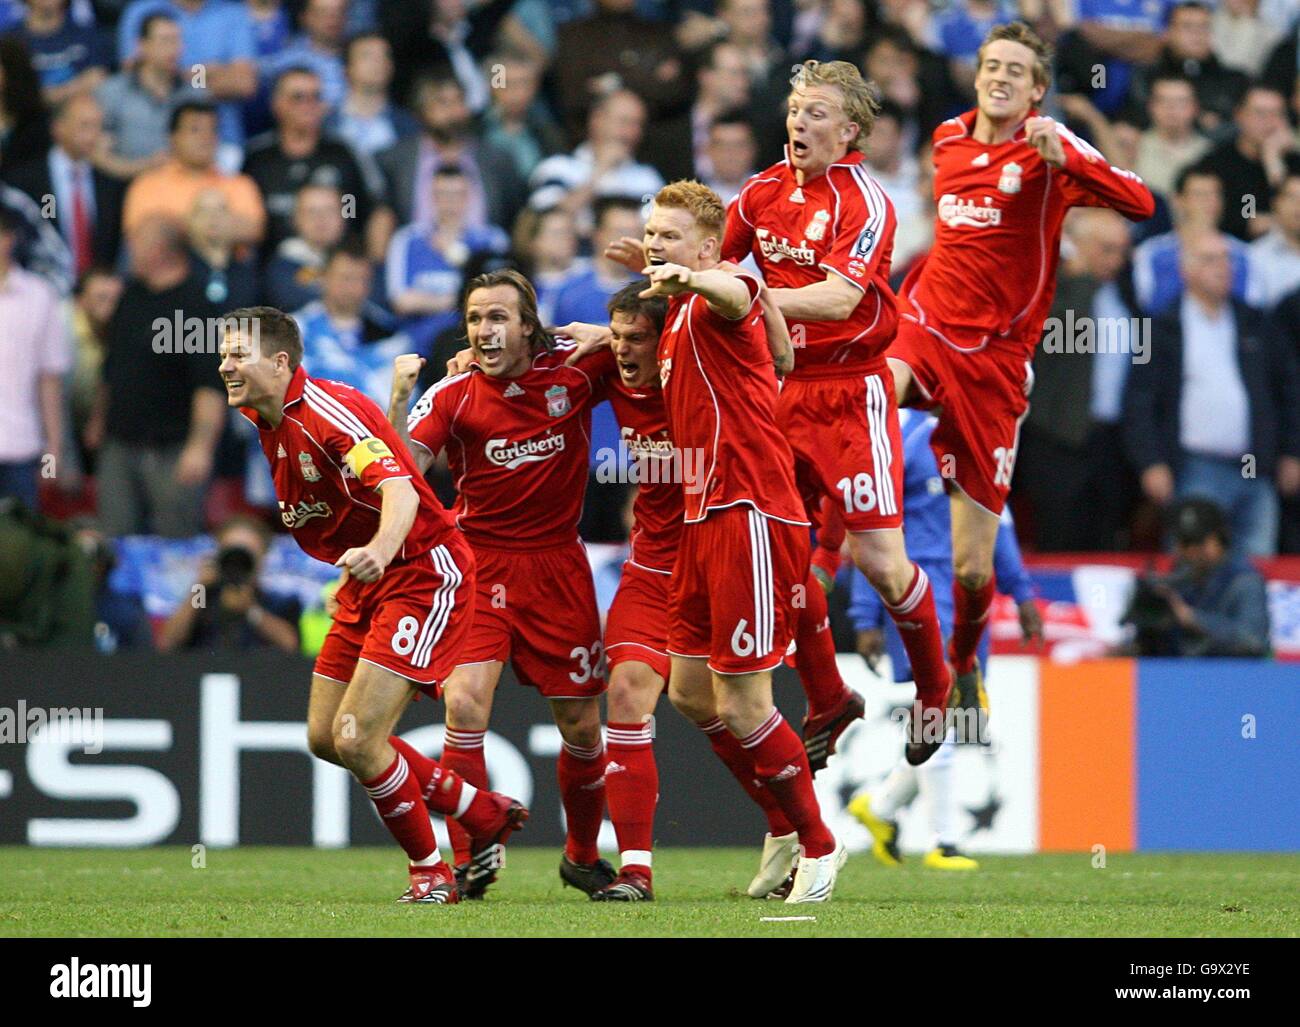 Liverpool players celebrate after Daniel Agger scores the first goal of the game. L-R: Steven Gerrard, Boudewijn Zenden, Daniel Agger, John Arne Riise, Dirk Kuyt and Peter Crouch. Stock Photo